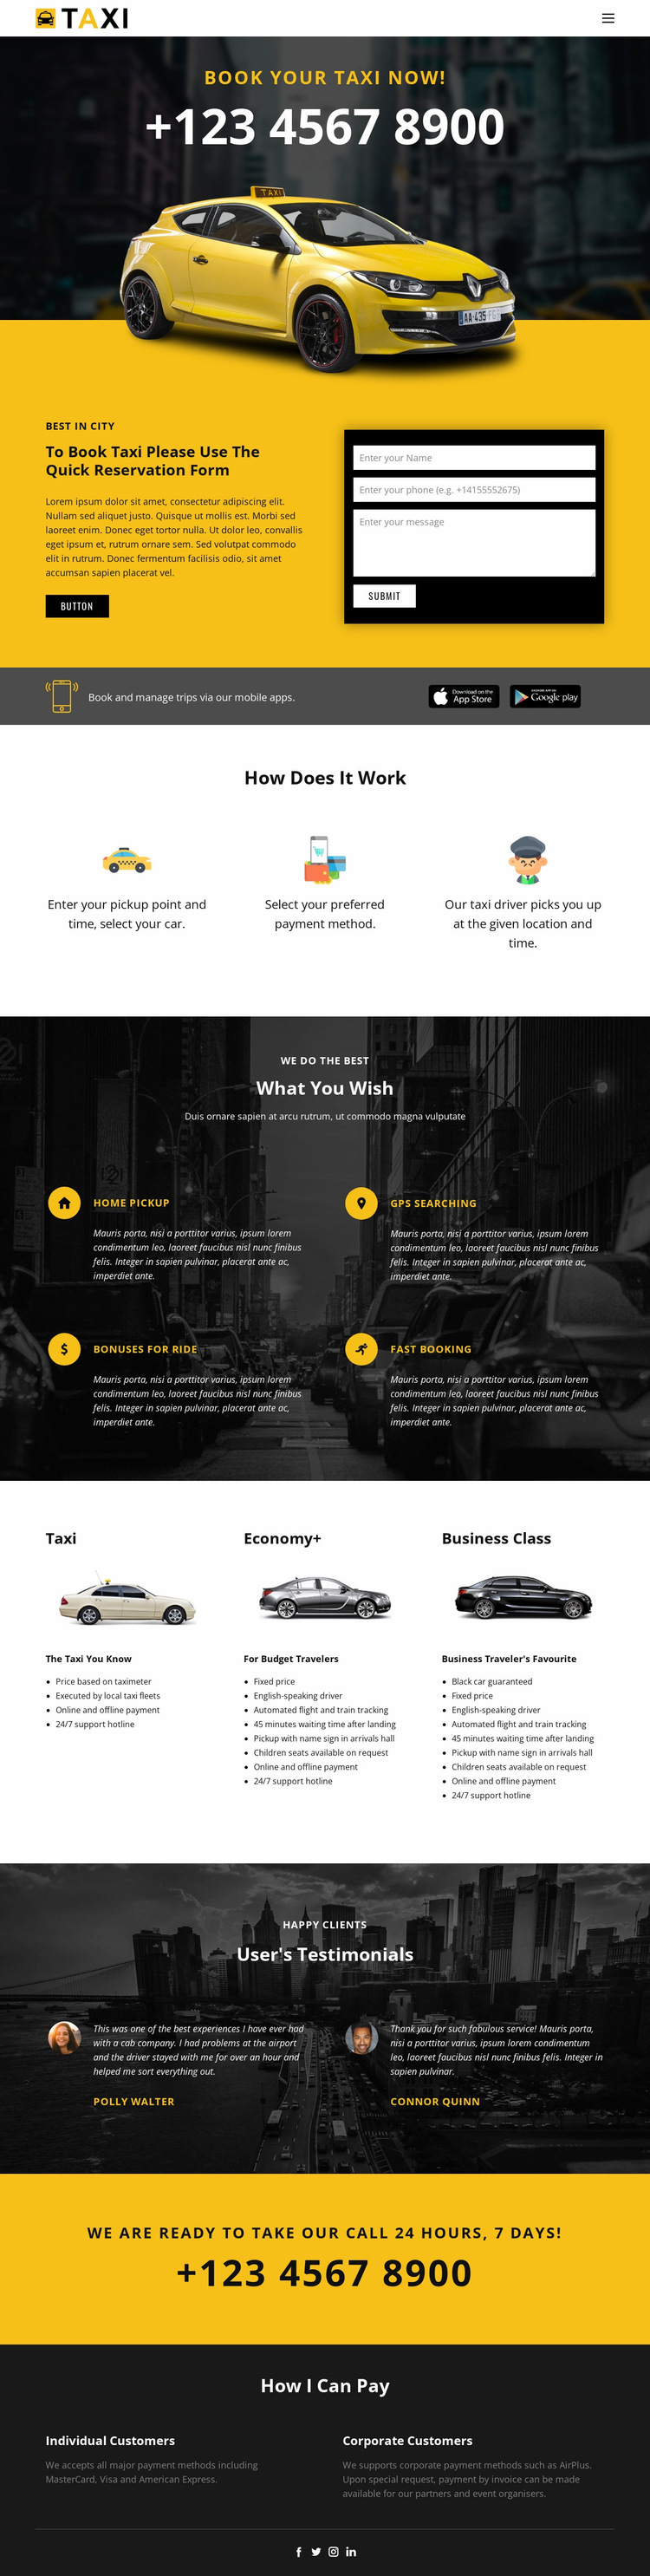 Fastest taxi cars Website Builder Templates